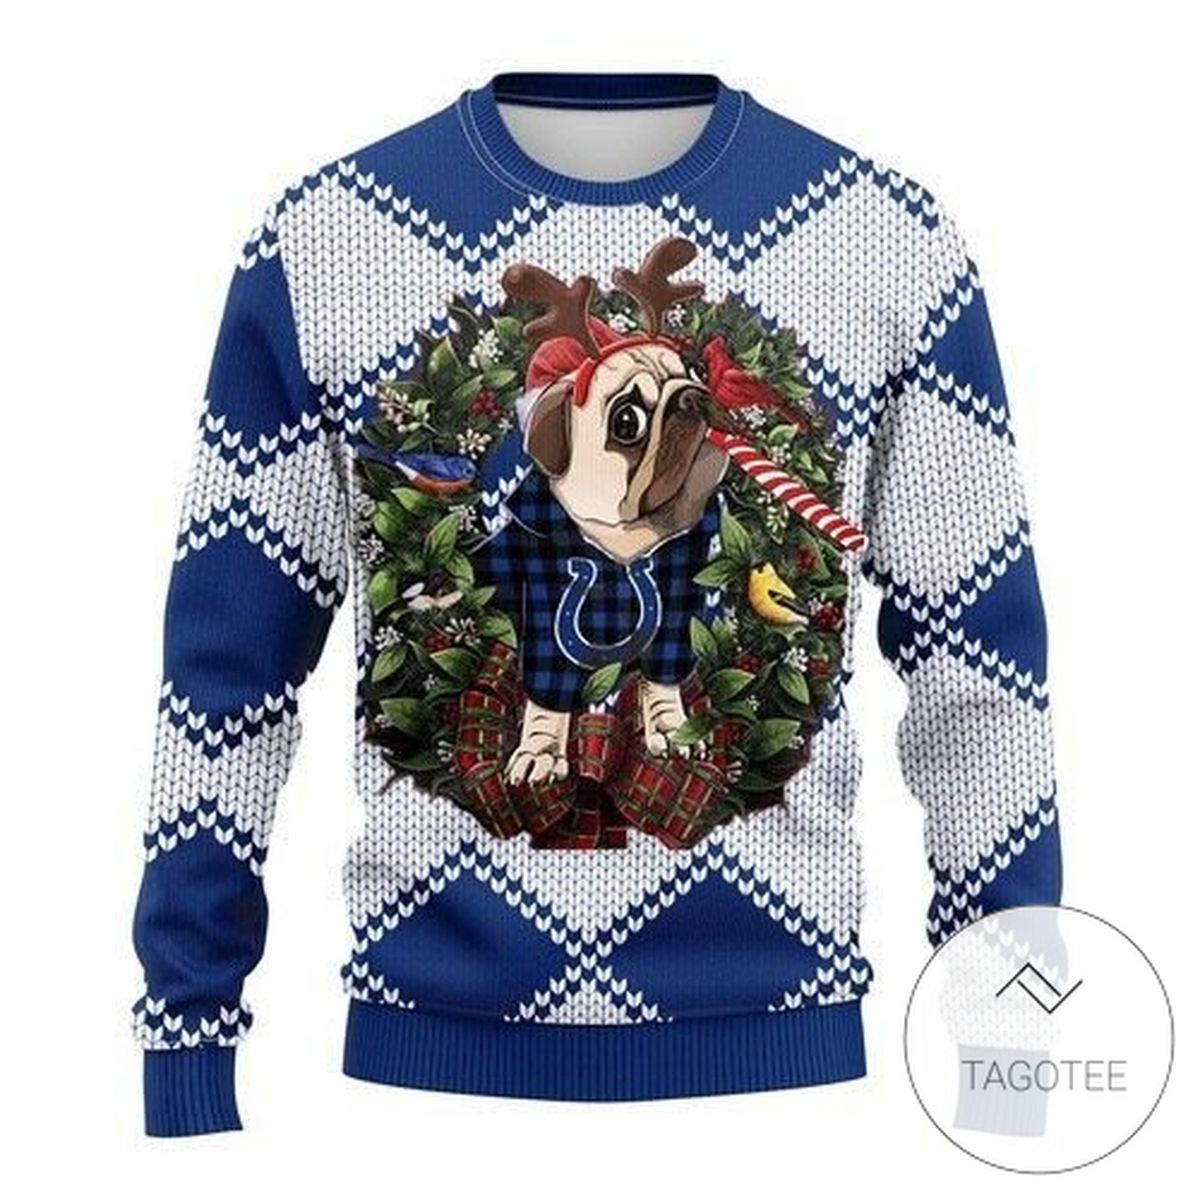 Nfl Indianapolis Colts Pug Dog Sweatshirt Knitted Ugly Christmas Sweater